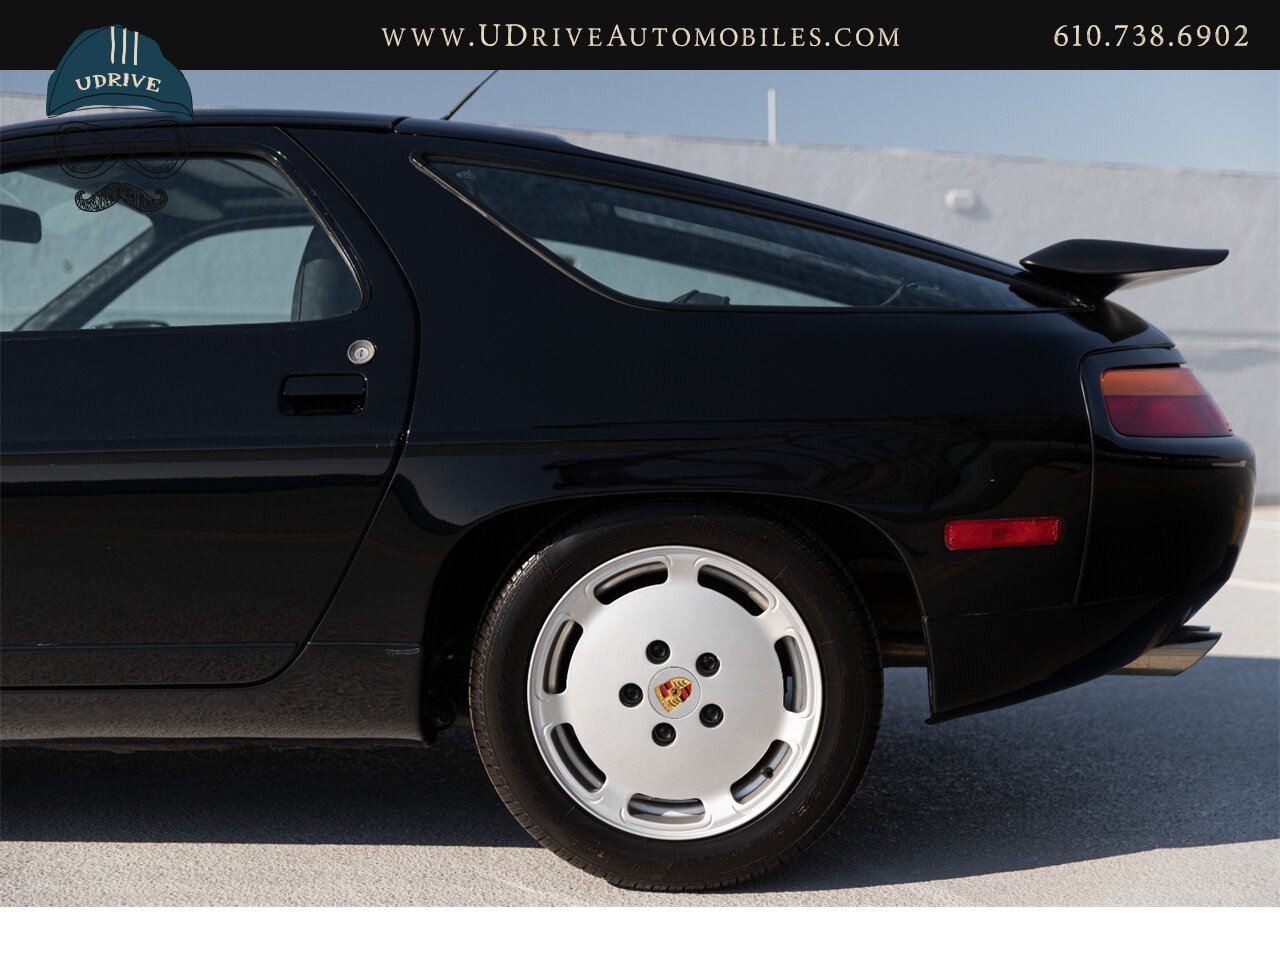 1990 Porsche 928 S4 $58k in Service History Since 2014   - Photo 25 - West Chester, PA 19382